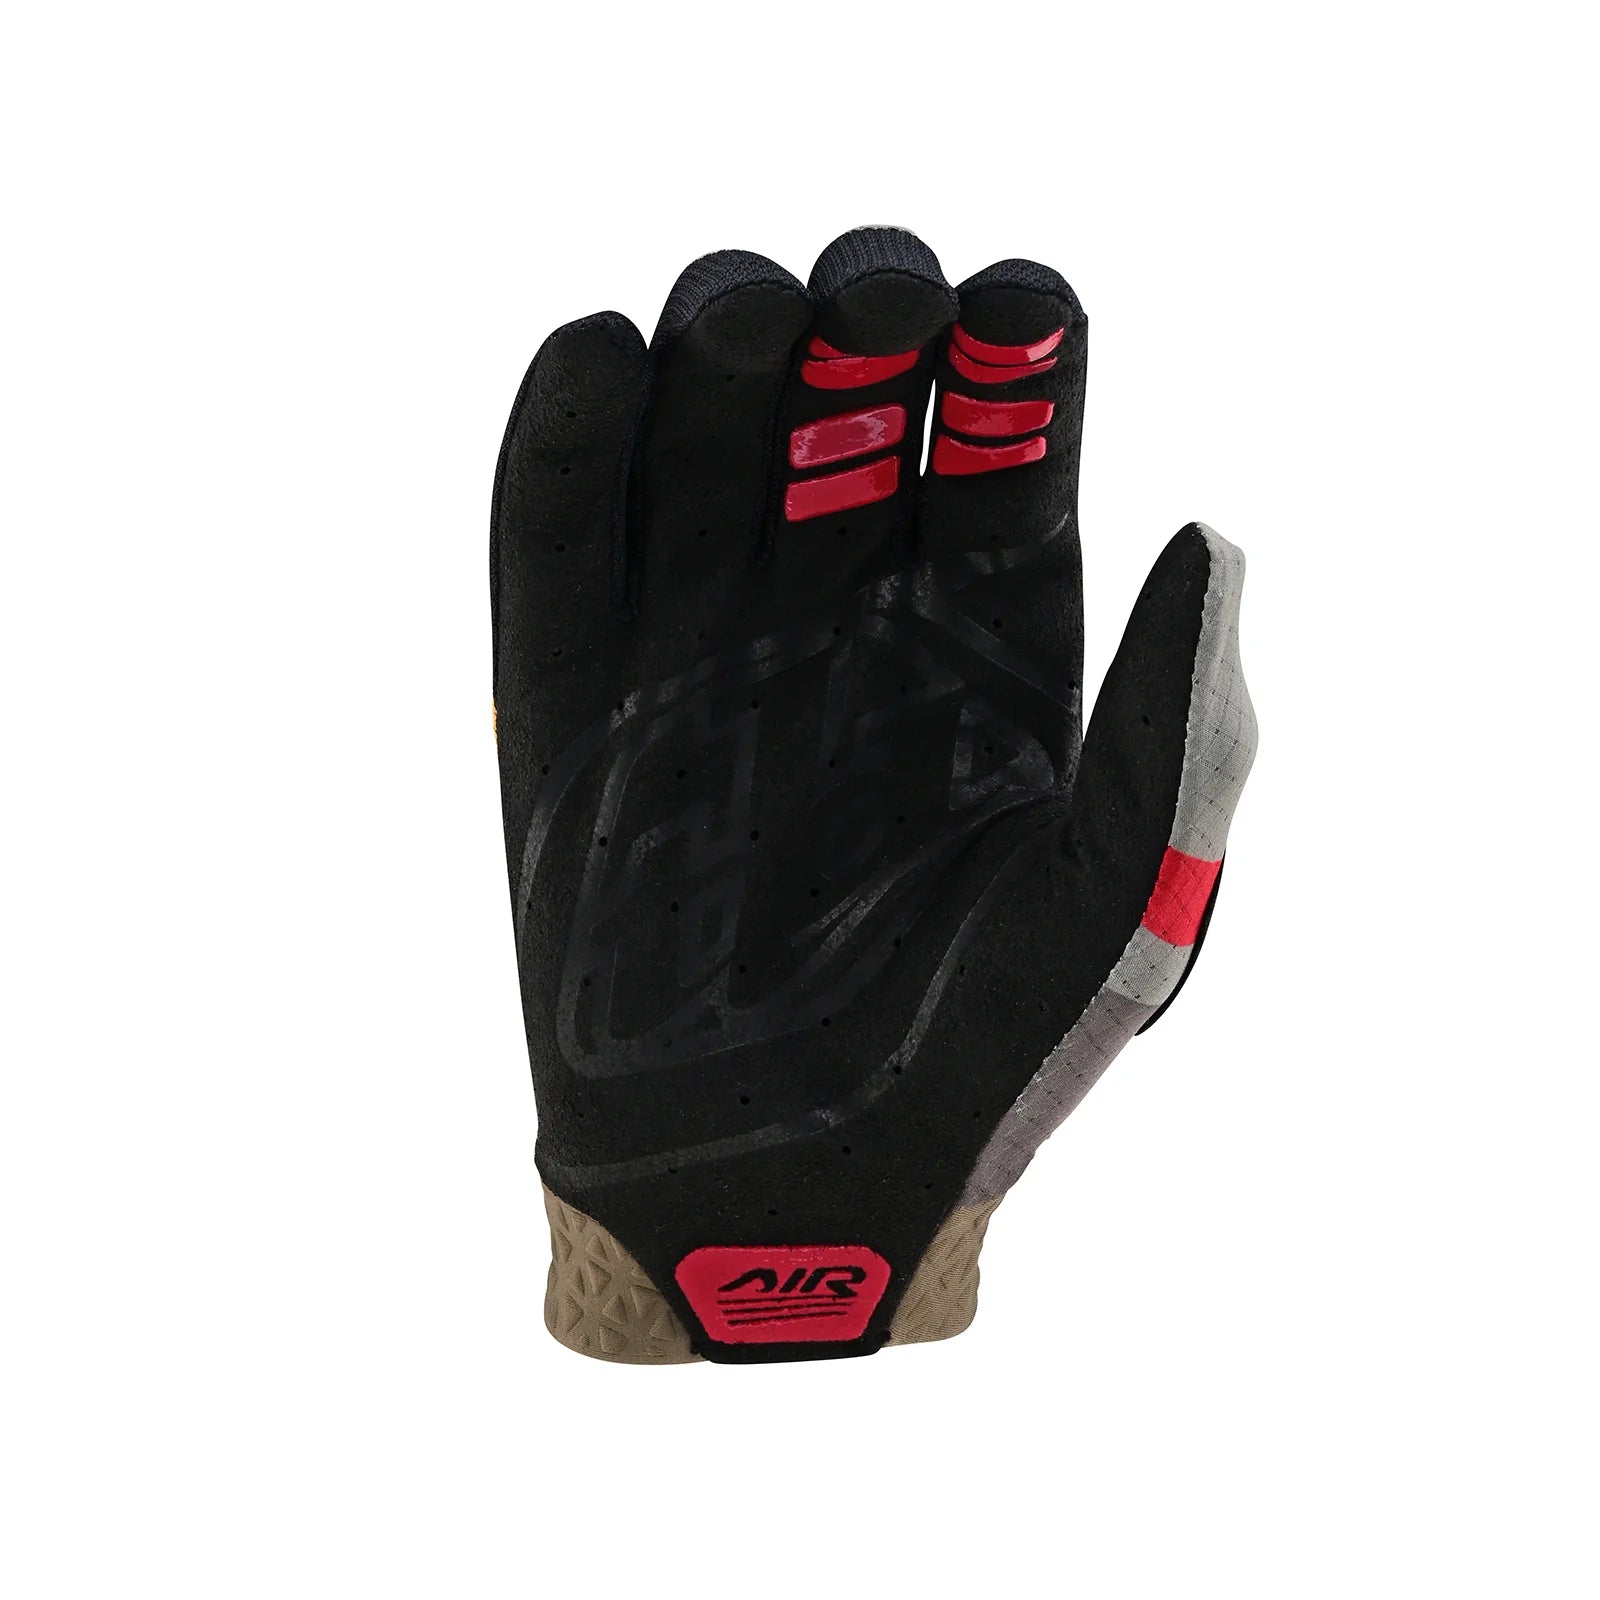 A single black and red TLD Air Glove Pinned Olive with breathability, isolated on a white background.